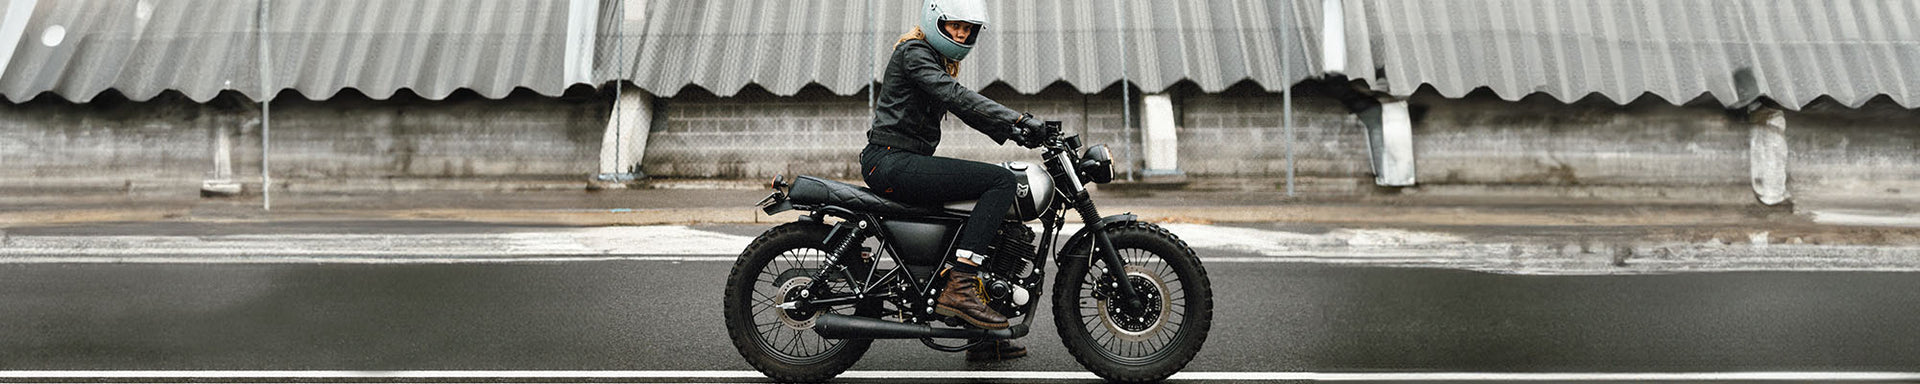 Road Tested: The new Saint Engineered armored motorcycle jeans